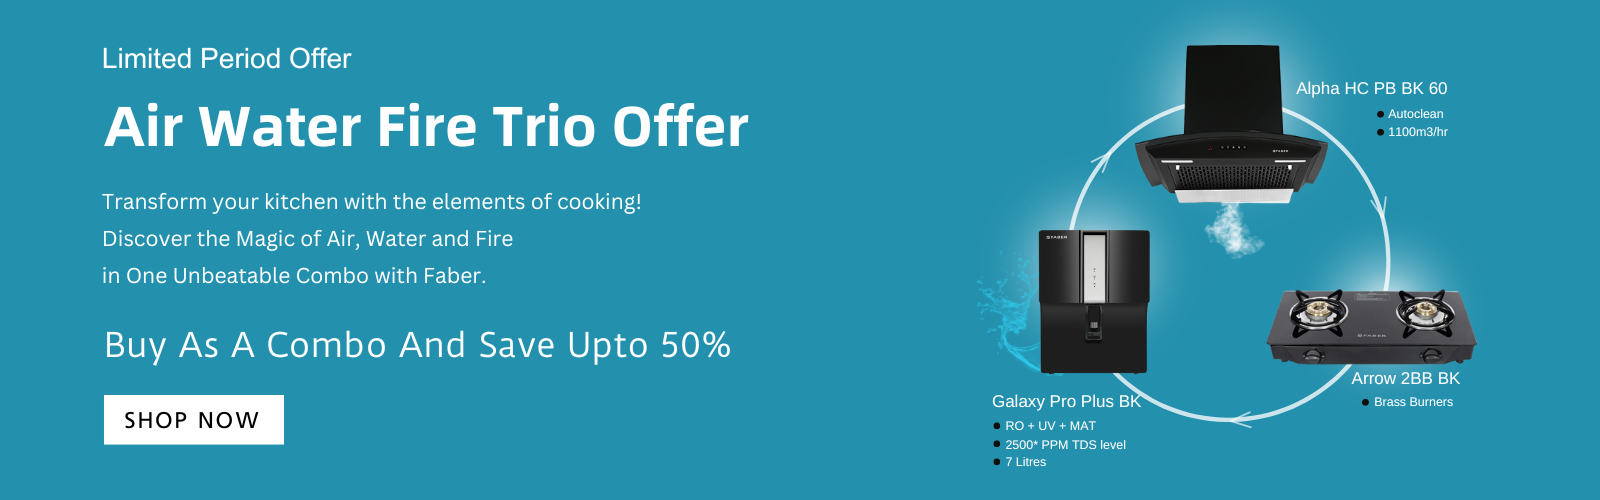 Limited Time Offer (1600 × 500 px)